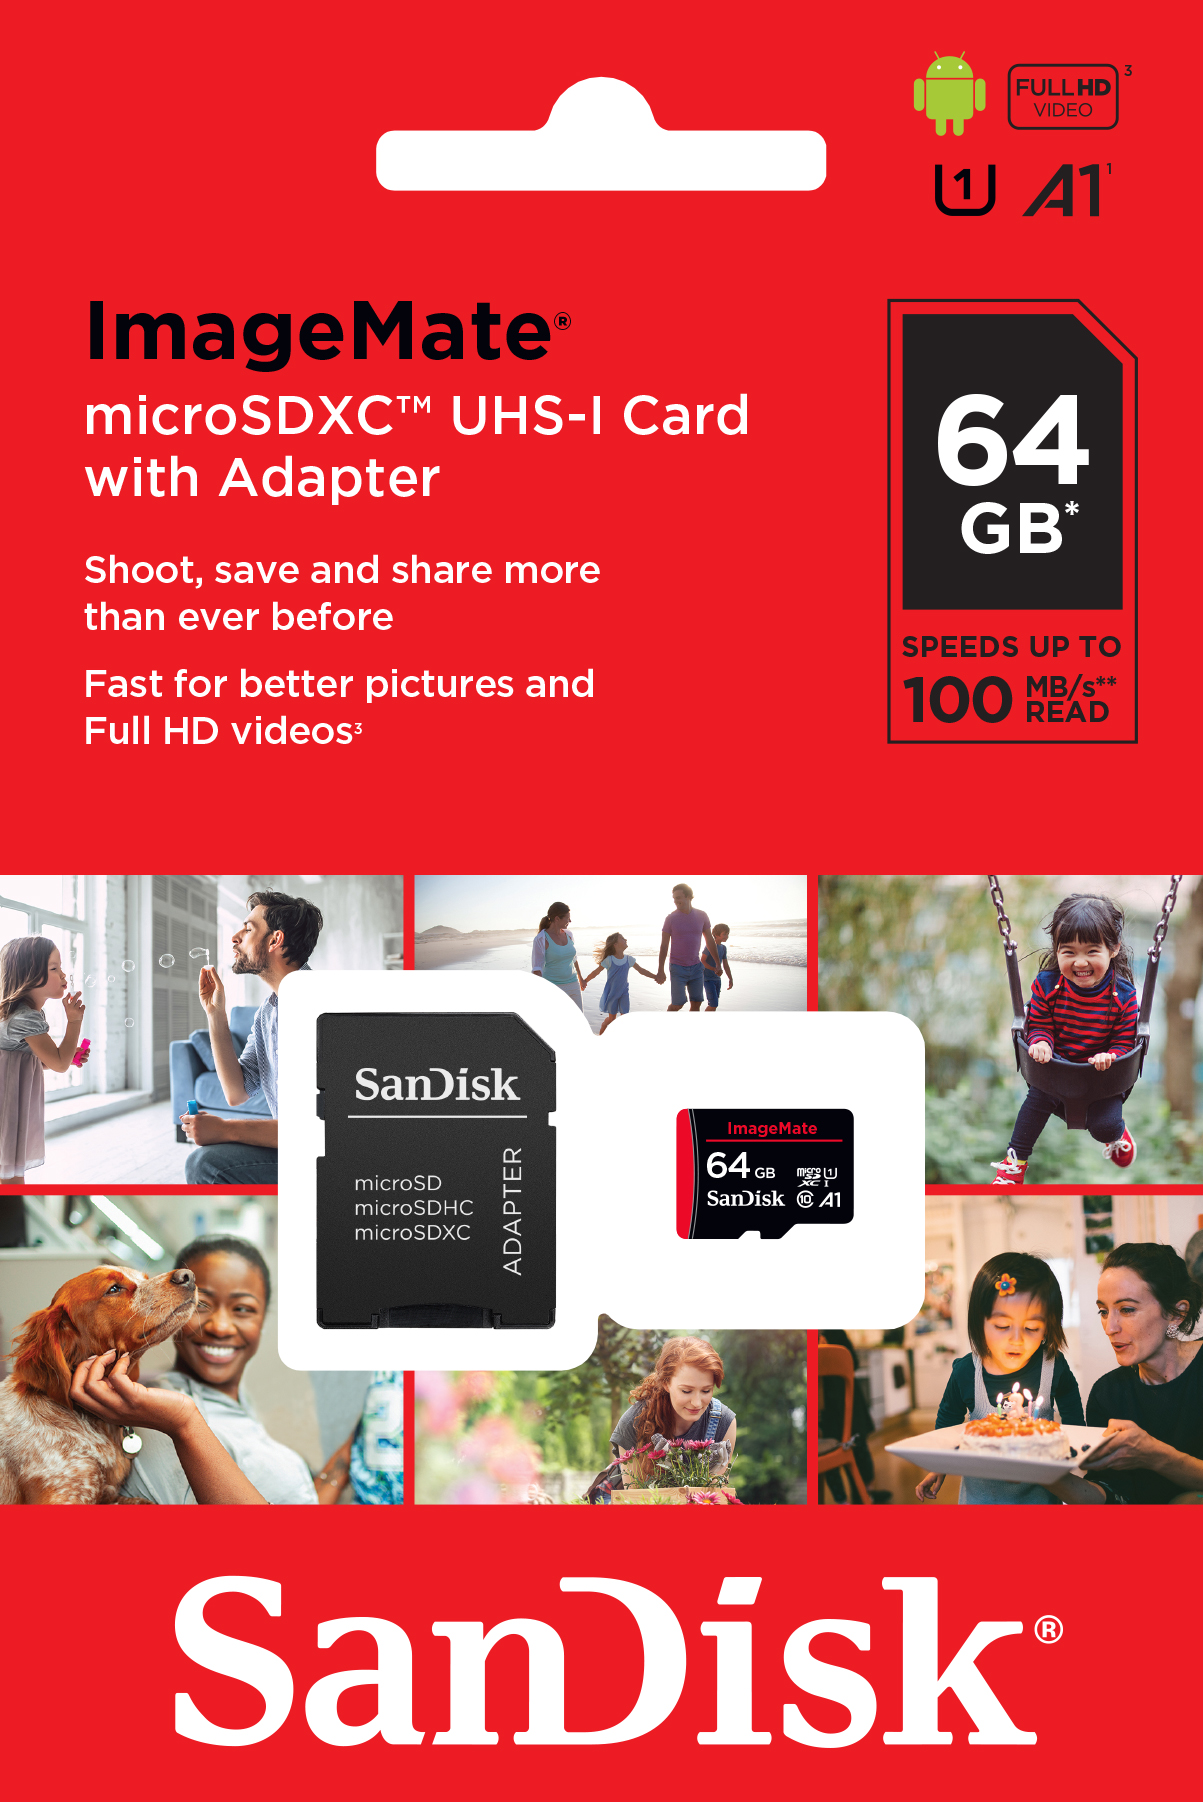 SanDisk 64GB Image Mate MicroSDXC UHS-1 Memory Card with Adapter - C10, U1, Full HD, A1 Micro SD Card - image 4 of 6